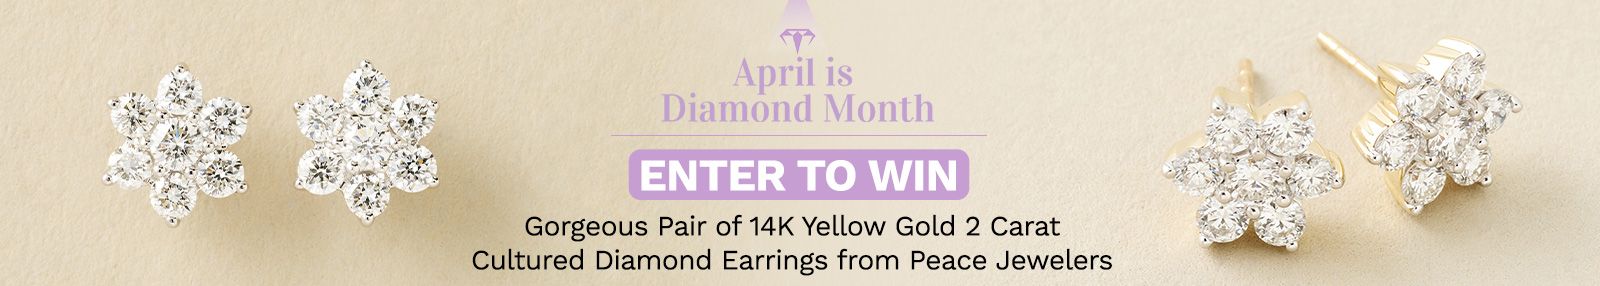 April is Diamond Month -  Enter to Win a Gorgeous Pair of 14K Yellow Gold 1 Carat Cultured Diamond Earrings from Peace Jewelers